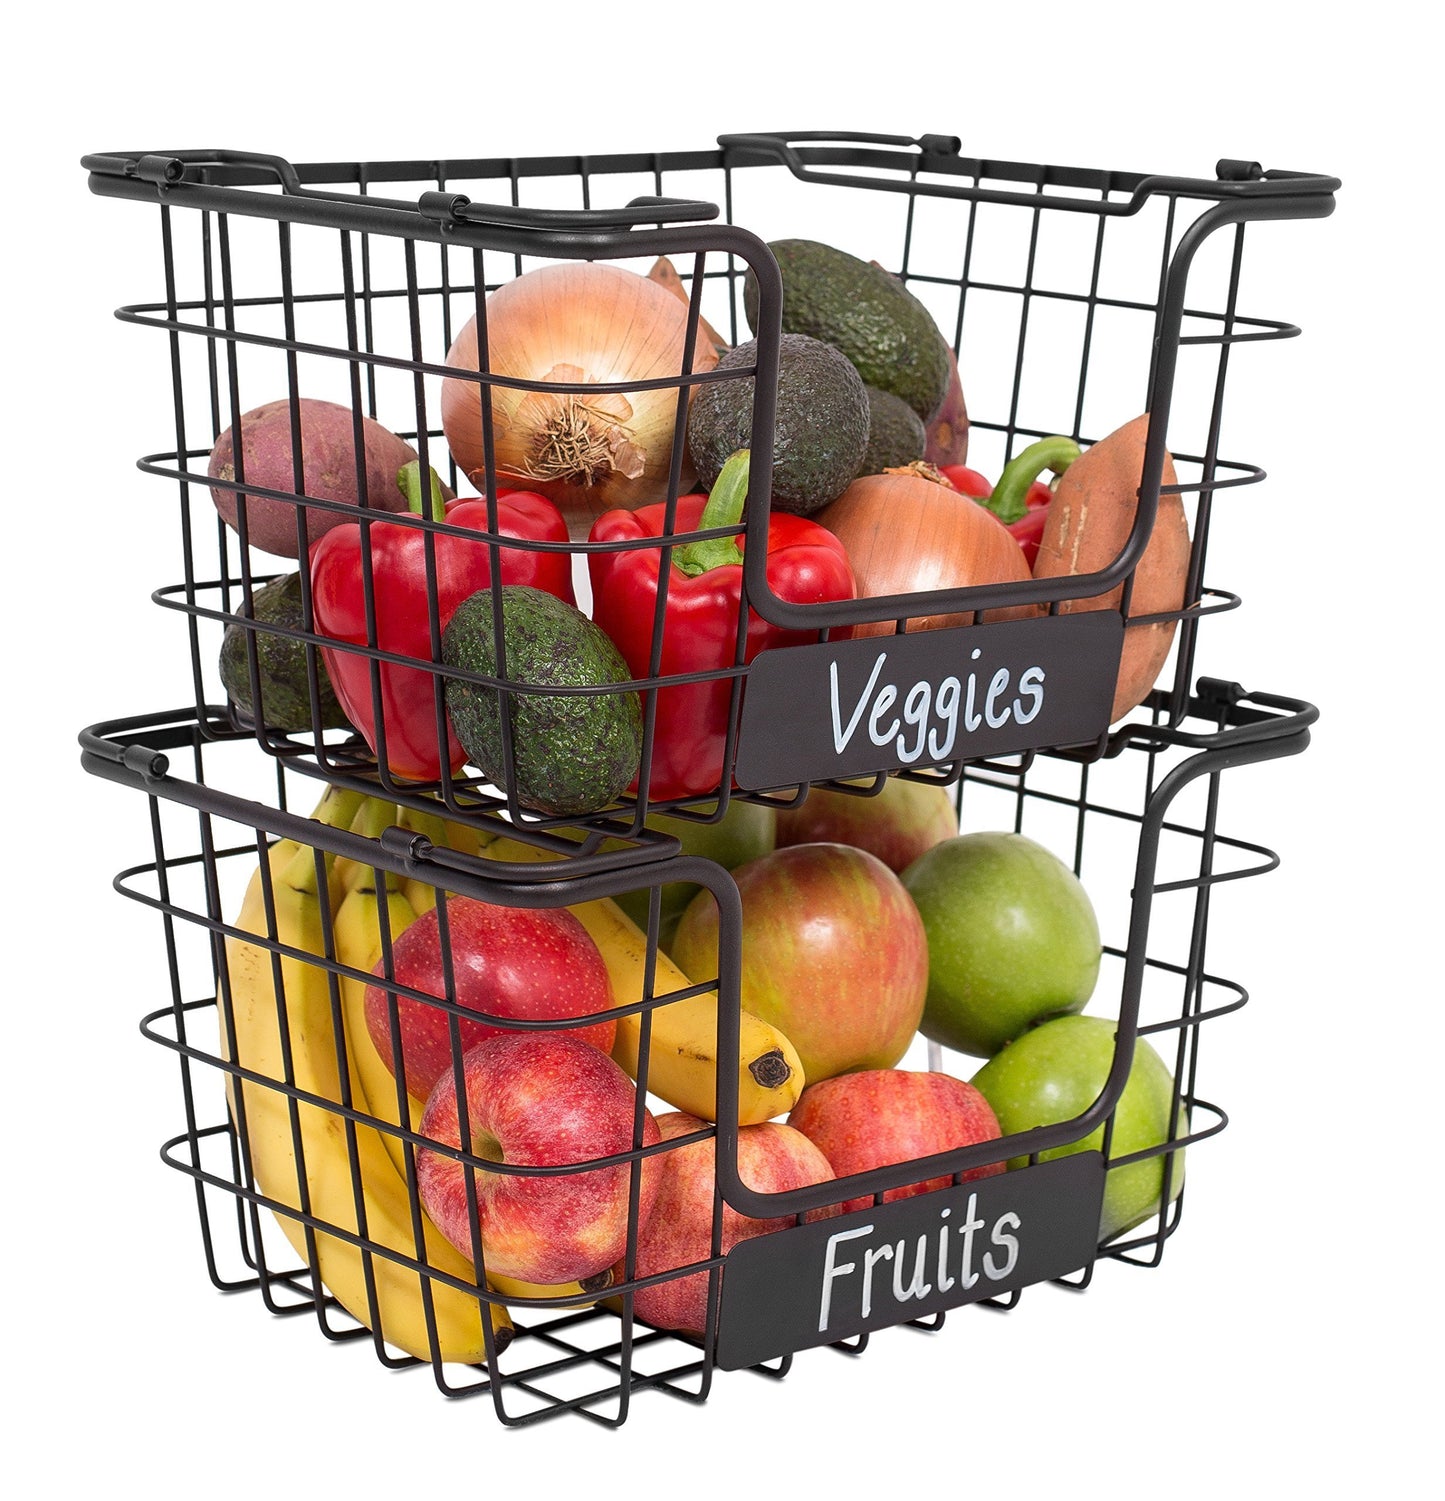 Top rated birdrock home stacking wire market baskets with chalk label set of 2 fruit vegetable produce metal storage bin for kitchen counter black